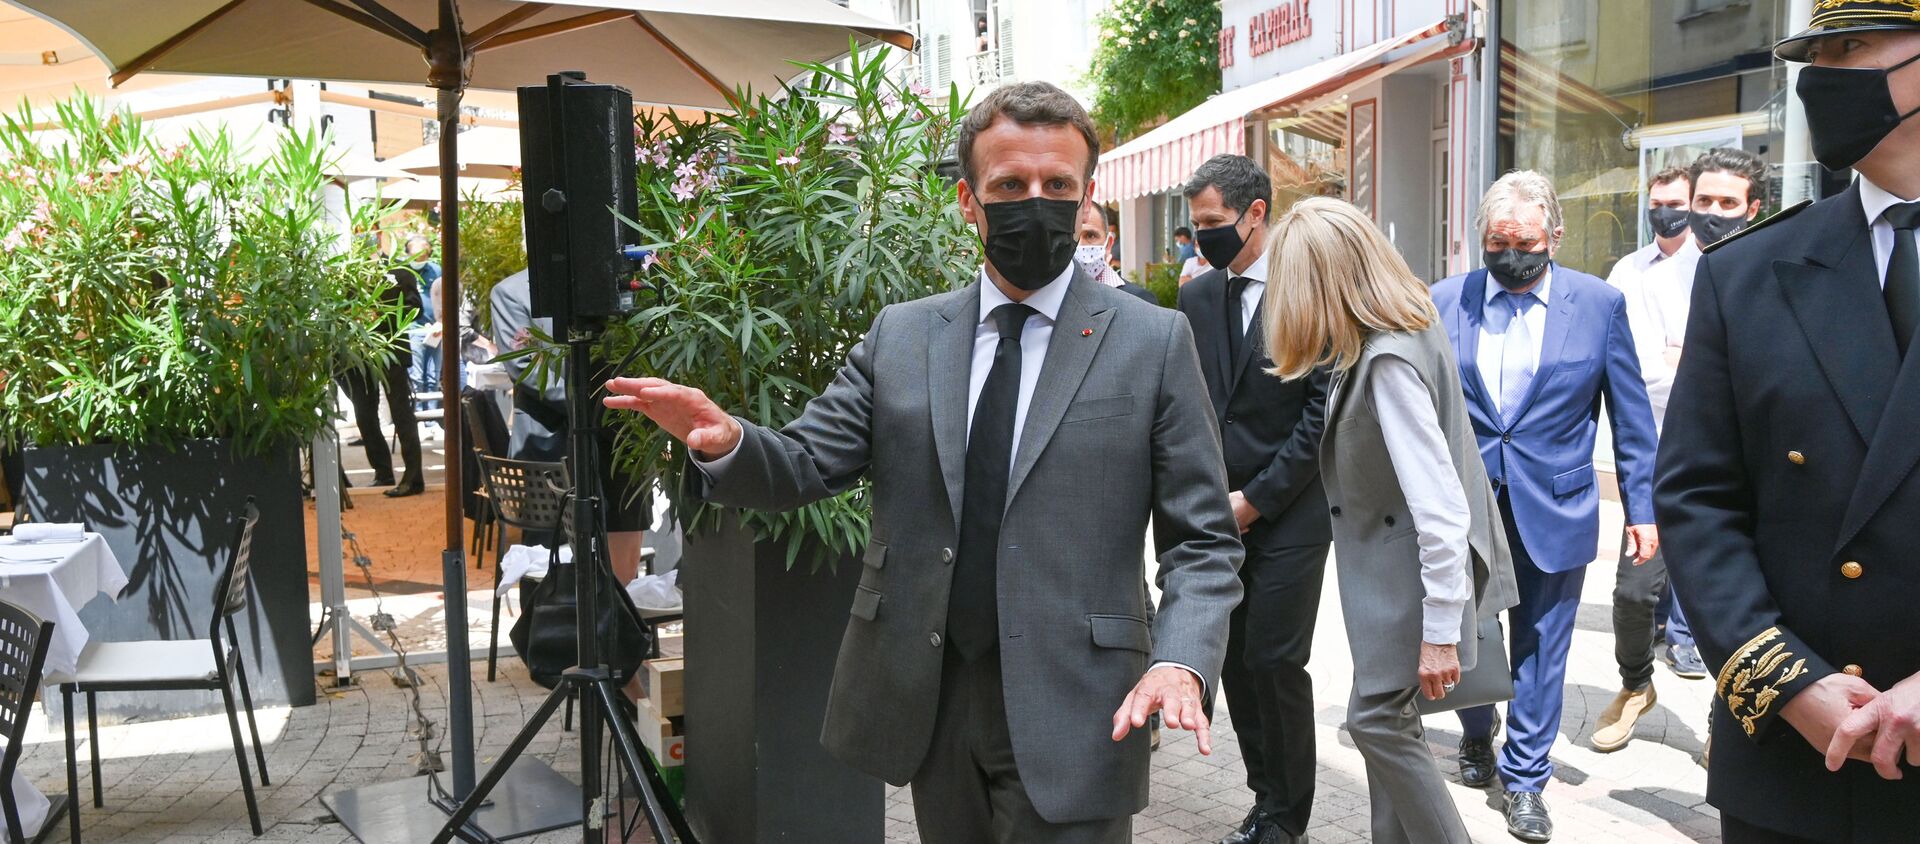 French President Emmanuel Macron arrives for a lunch in Valence, on June 8, 2021, during a day visit in the French southeastern department of Drome, the second stage of a nationwide tour ahead of next year's presidential election. - A bystander slapped Emmanuel Macron across the face during a trip to southeast France on June 8 on the second stop of a nation-wide tour. - Sputnik International, 1920, 08.06.2021